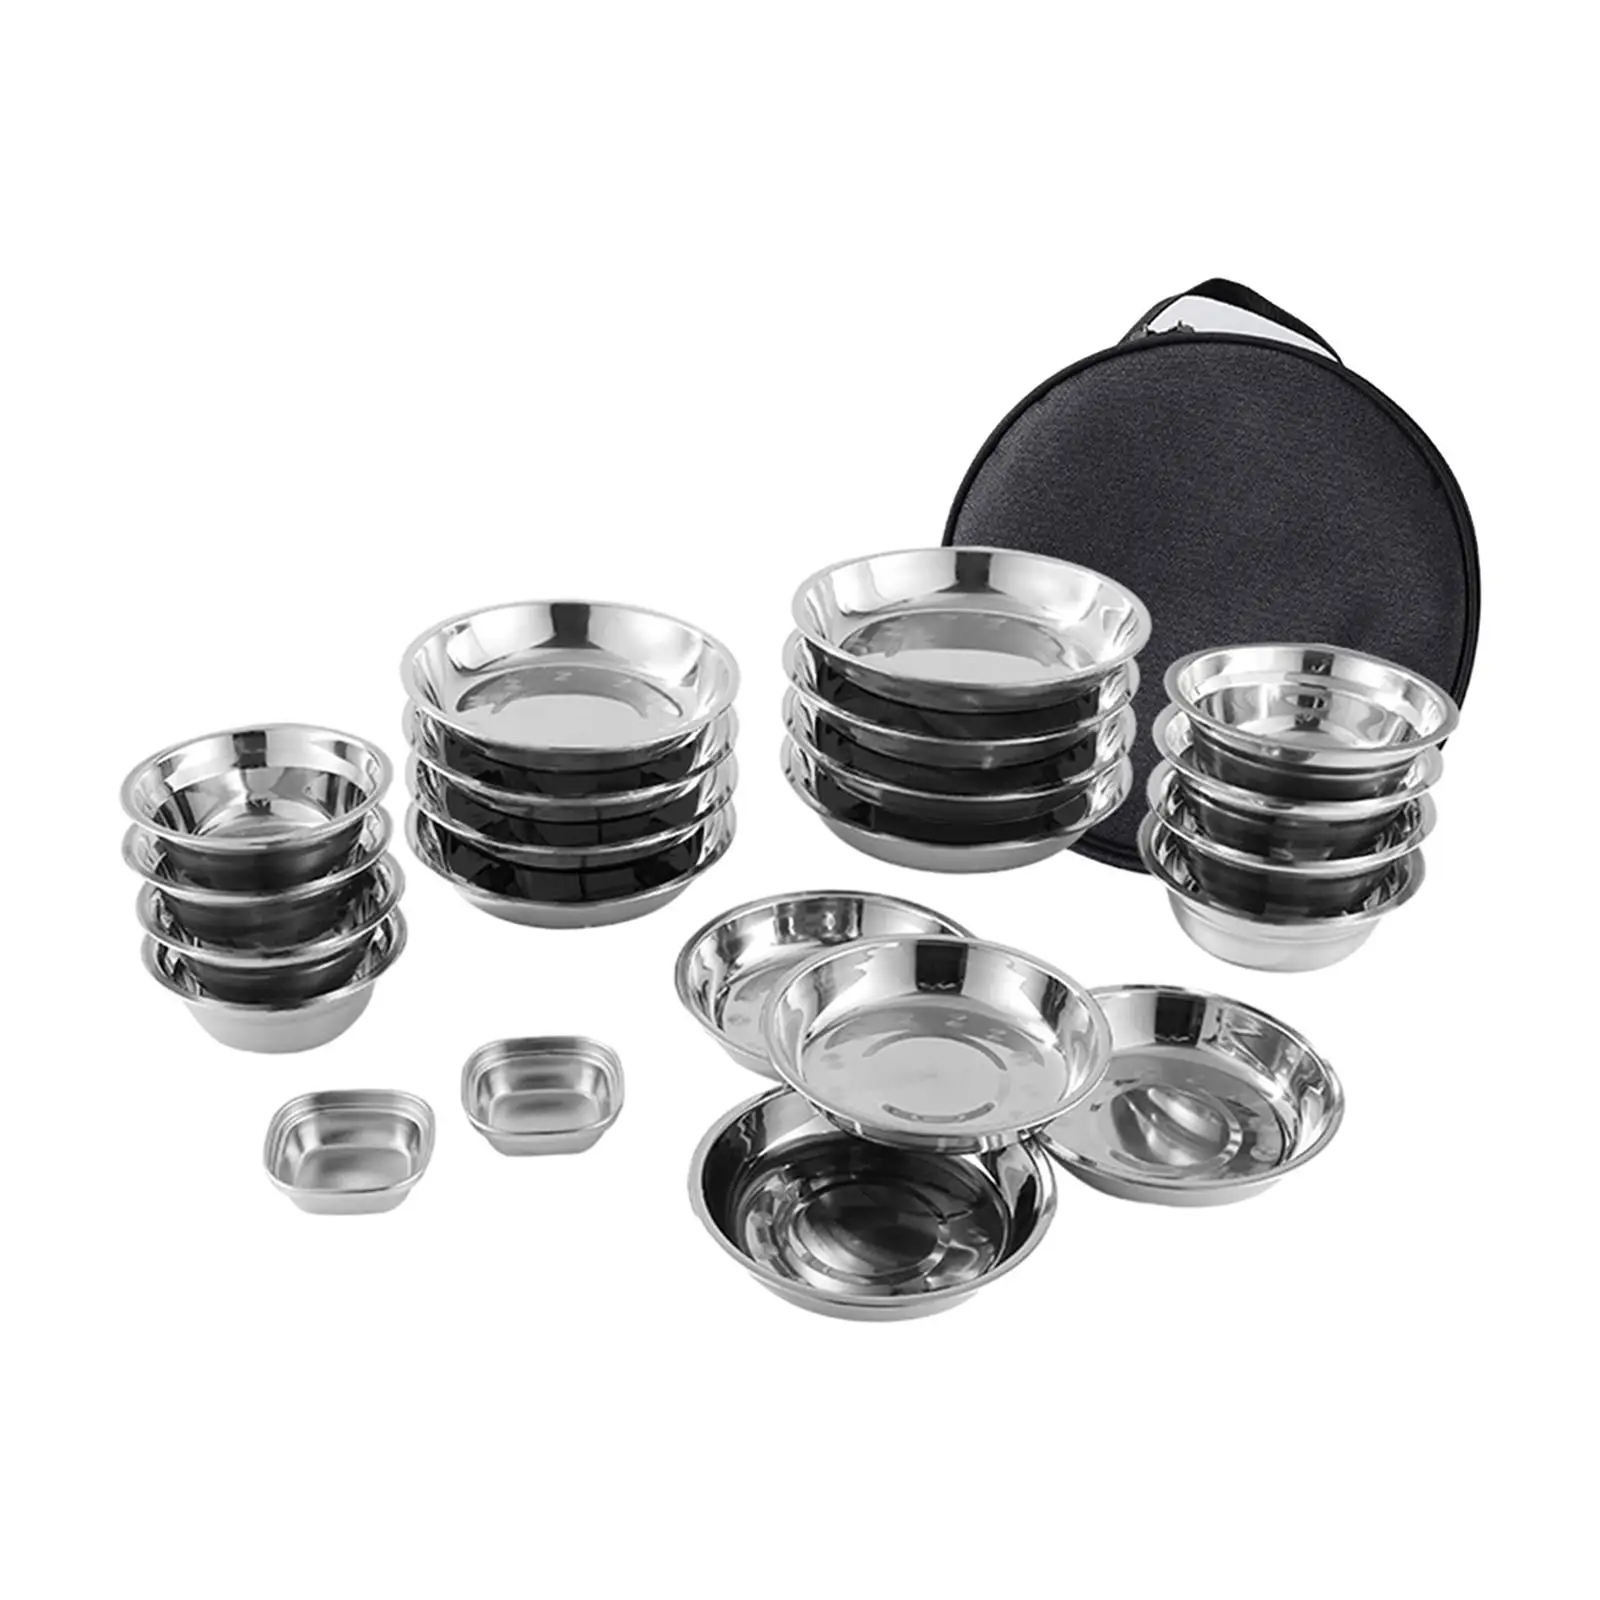 Stainless Steel Plates and Bowls Camping Accessories Lightweight Camping Mess Set for Picnic Beach Barbecue Hiking Backpacking